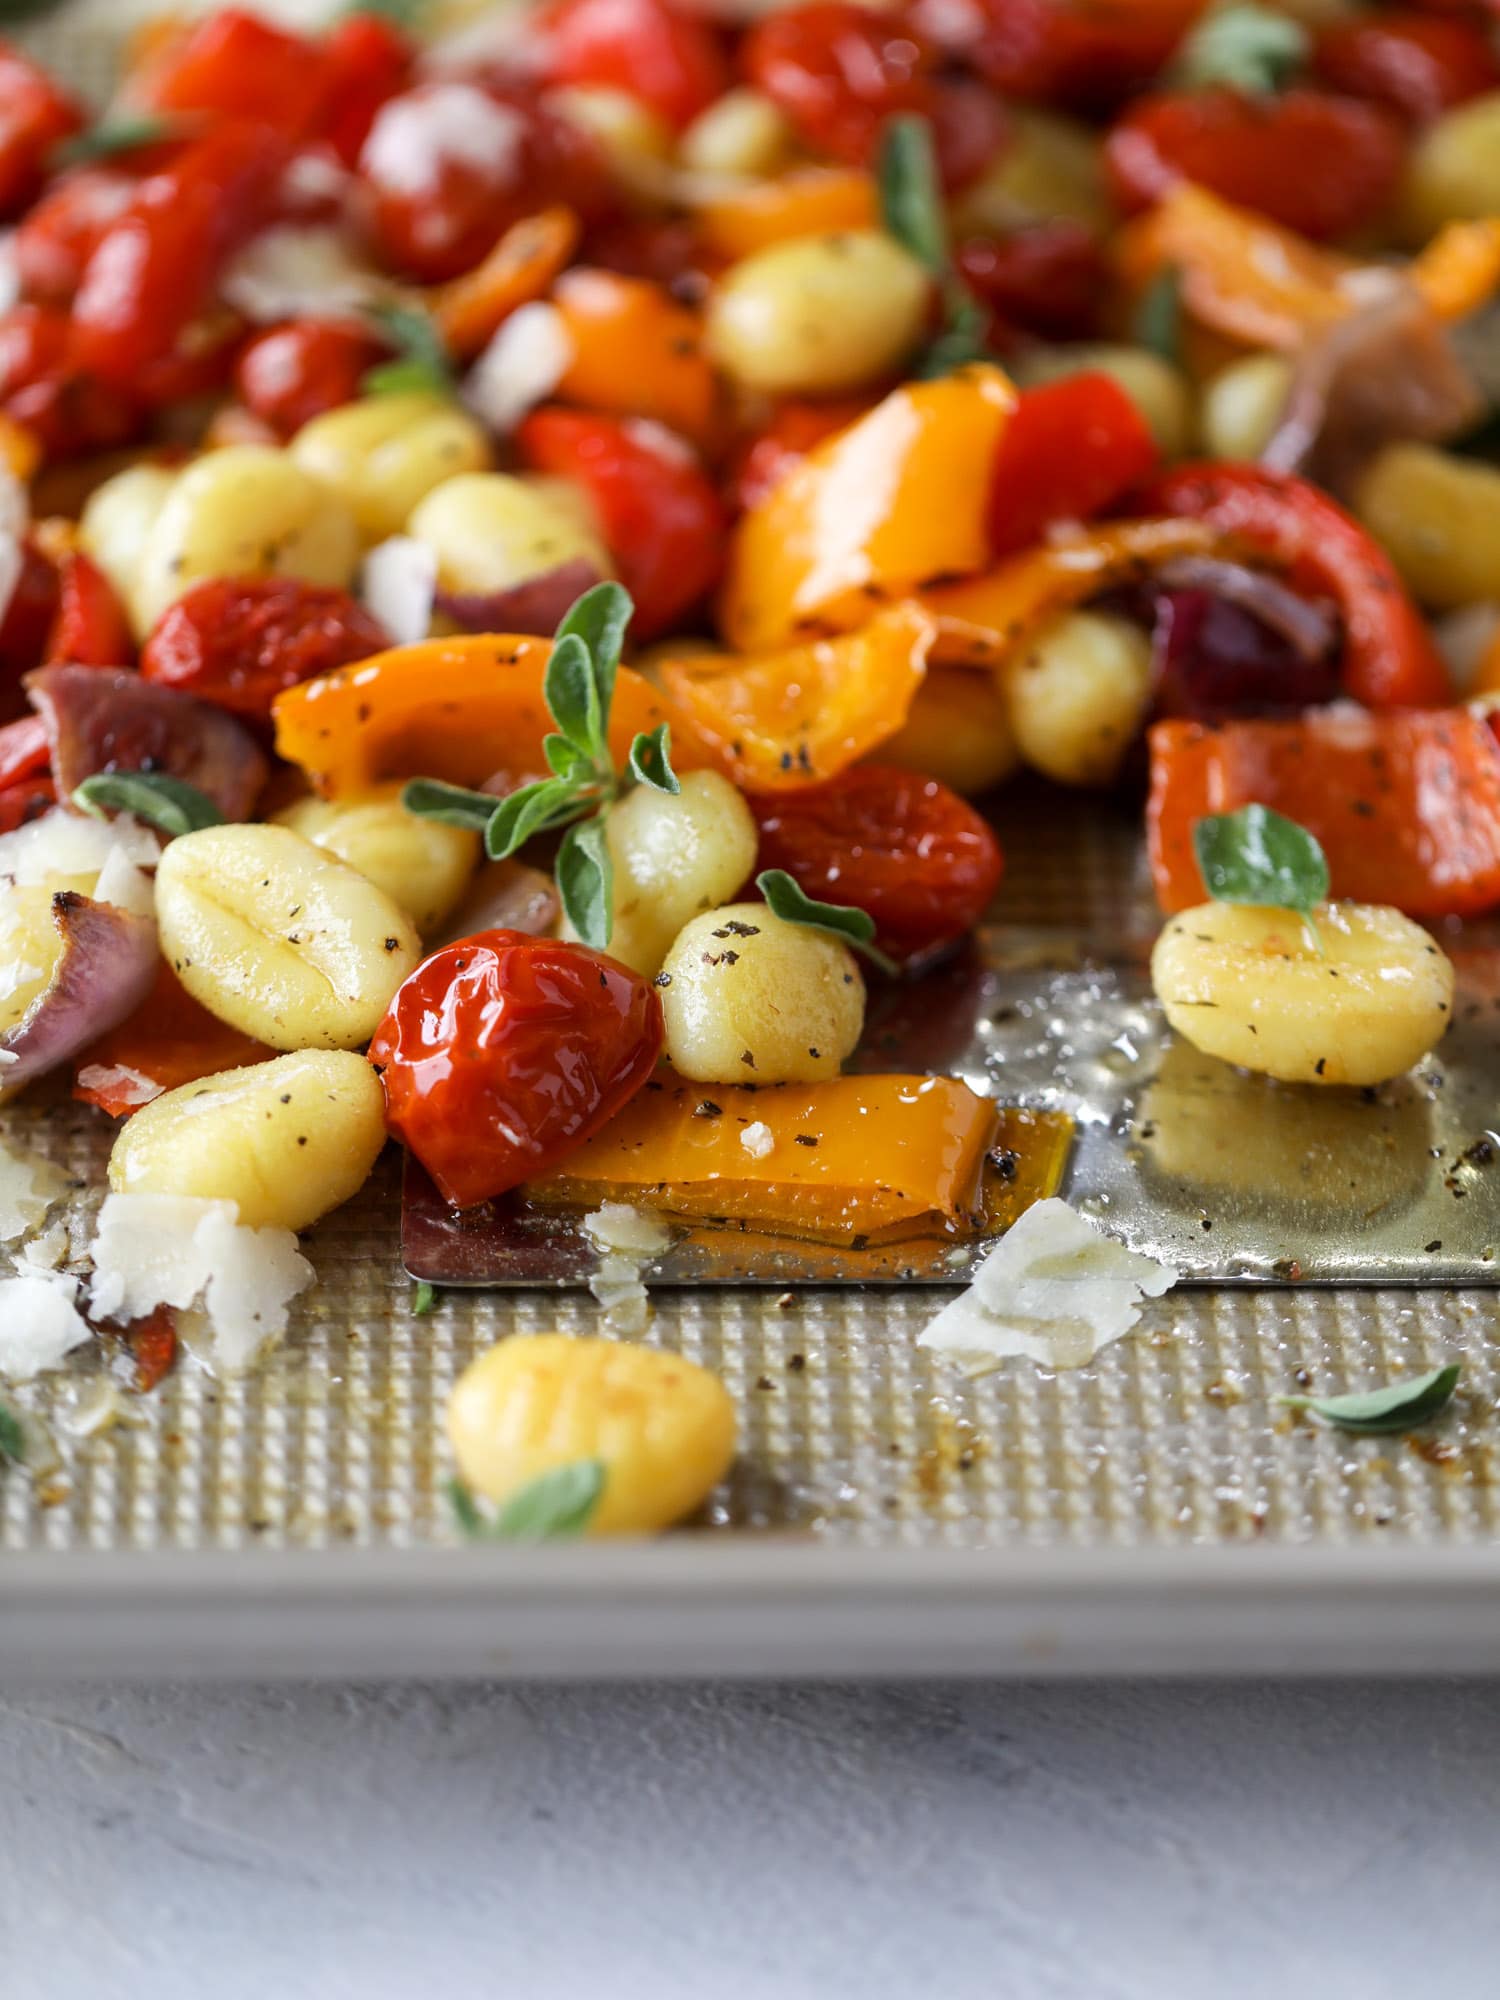 Sheet pan gnocchi is an easy meal that the whole family will love! Toasted gnocchi along with burst tomatoes and caramelized peppers makes the best dinner. I howsweeteats.com #sheetpan #gnocchi